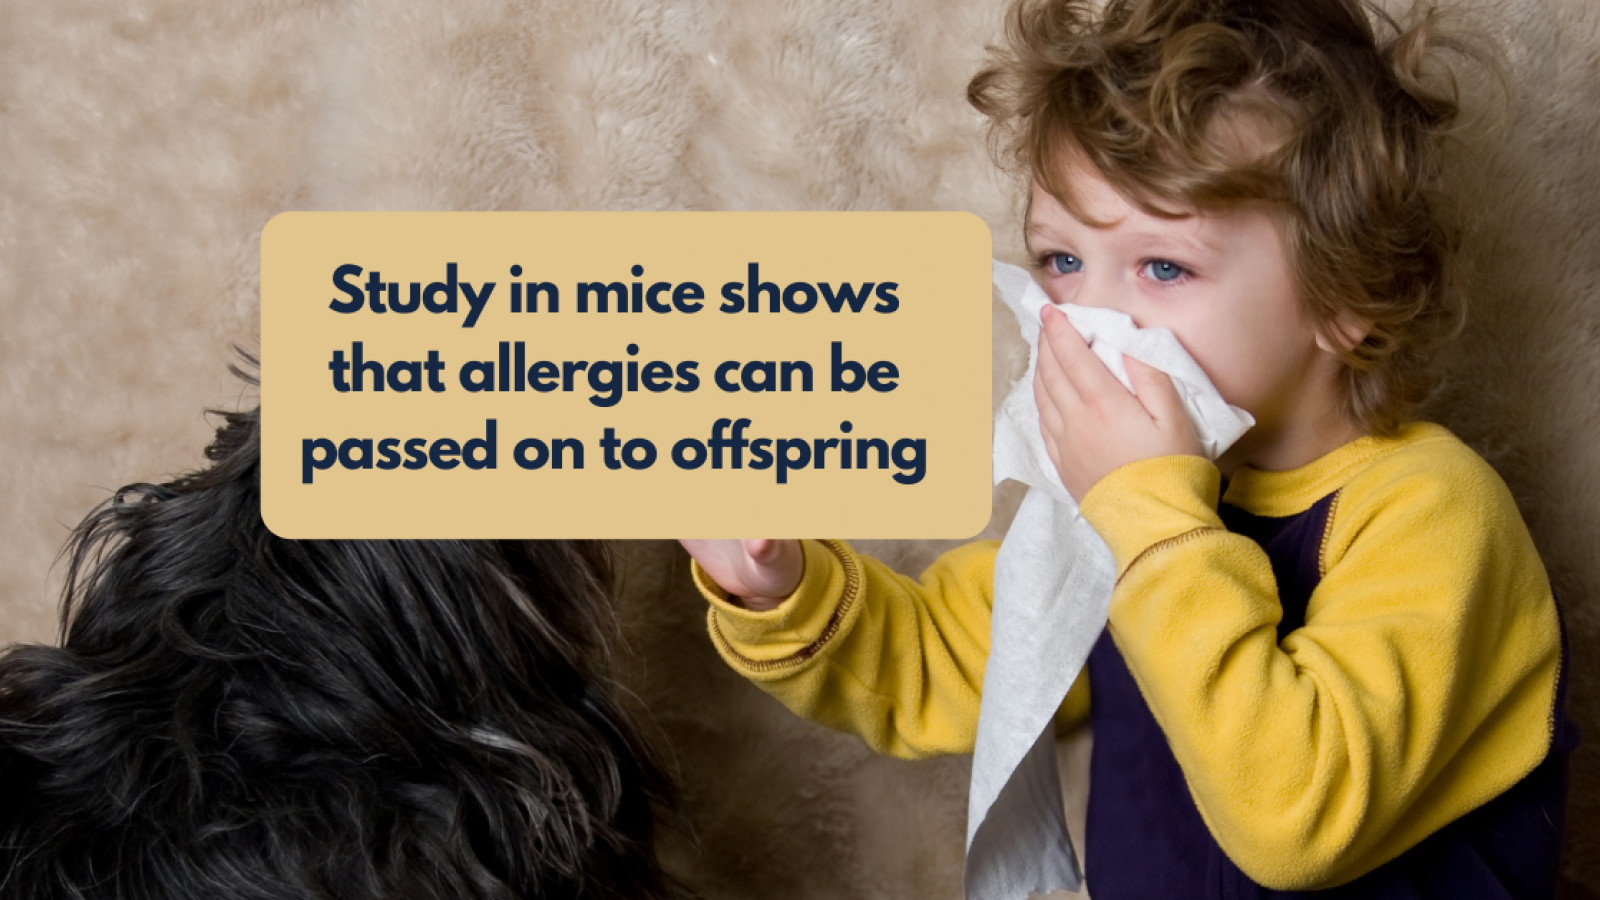 Study in mice shows that allergies can be passed on to offspring